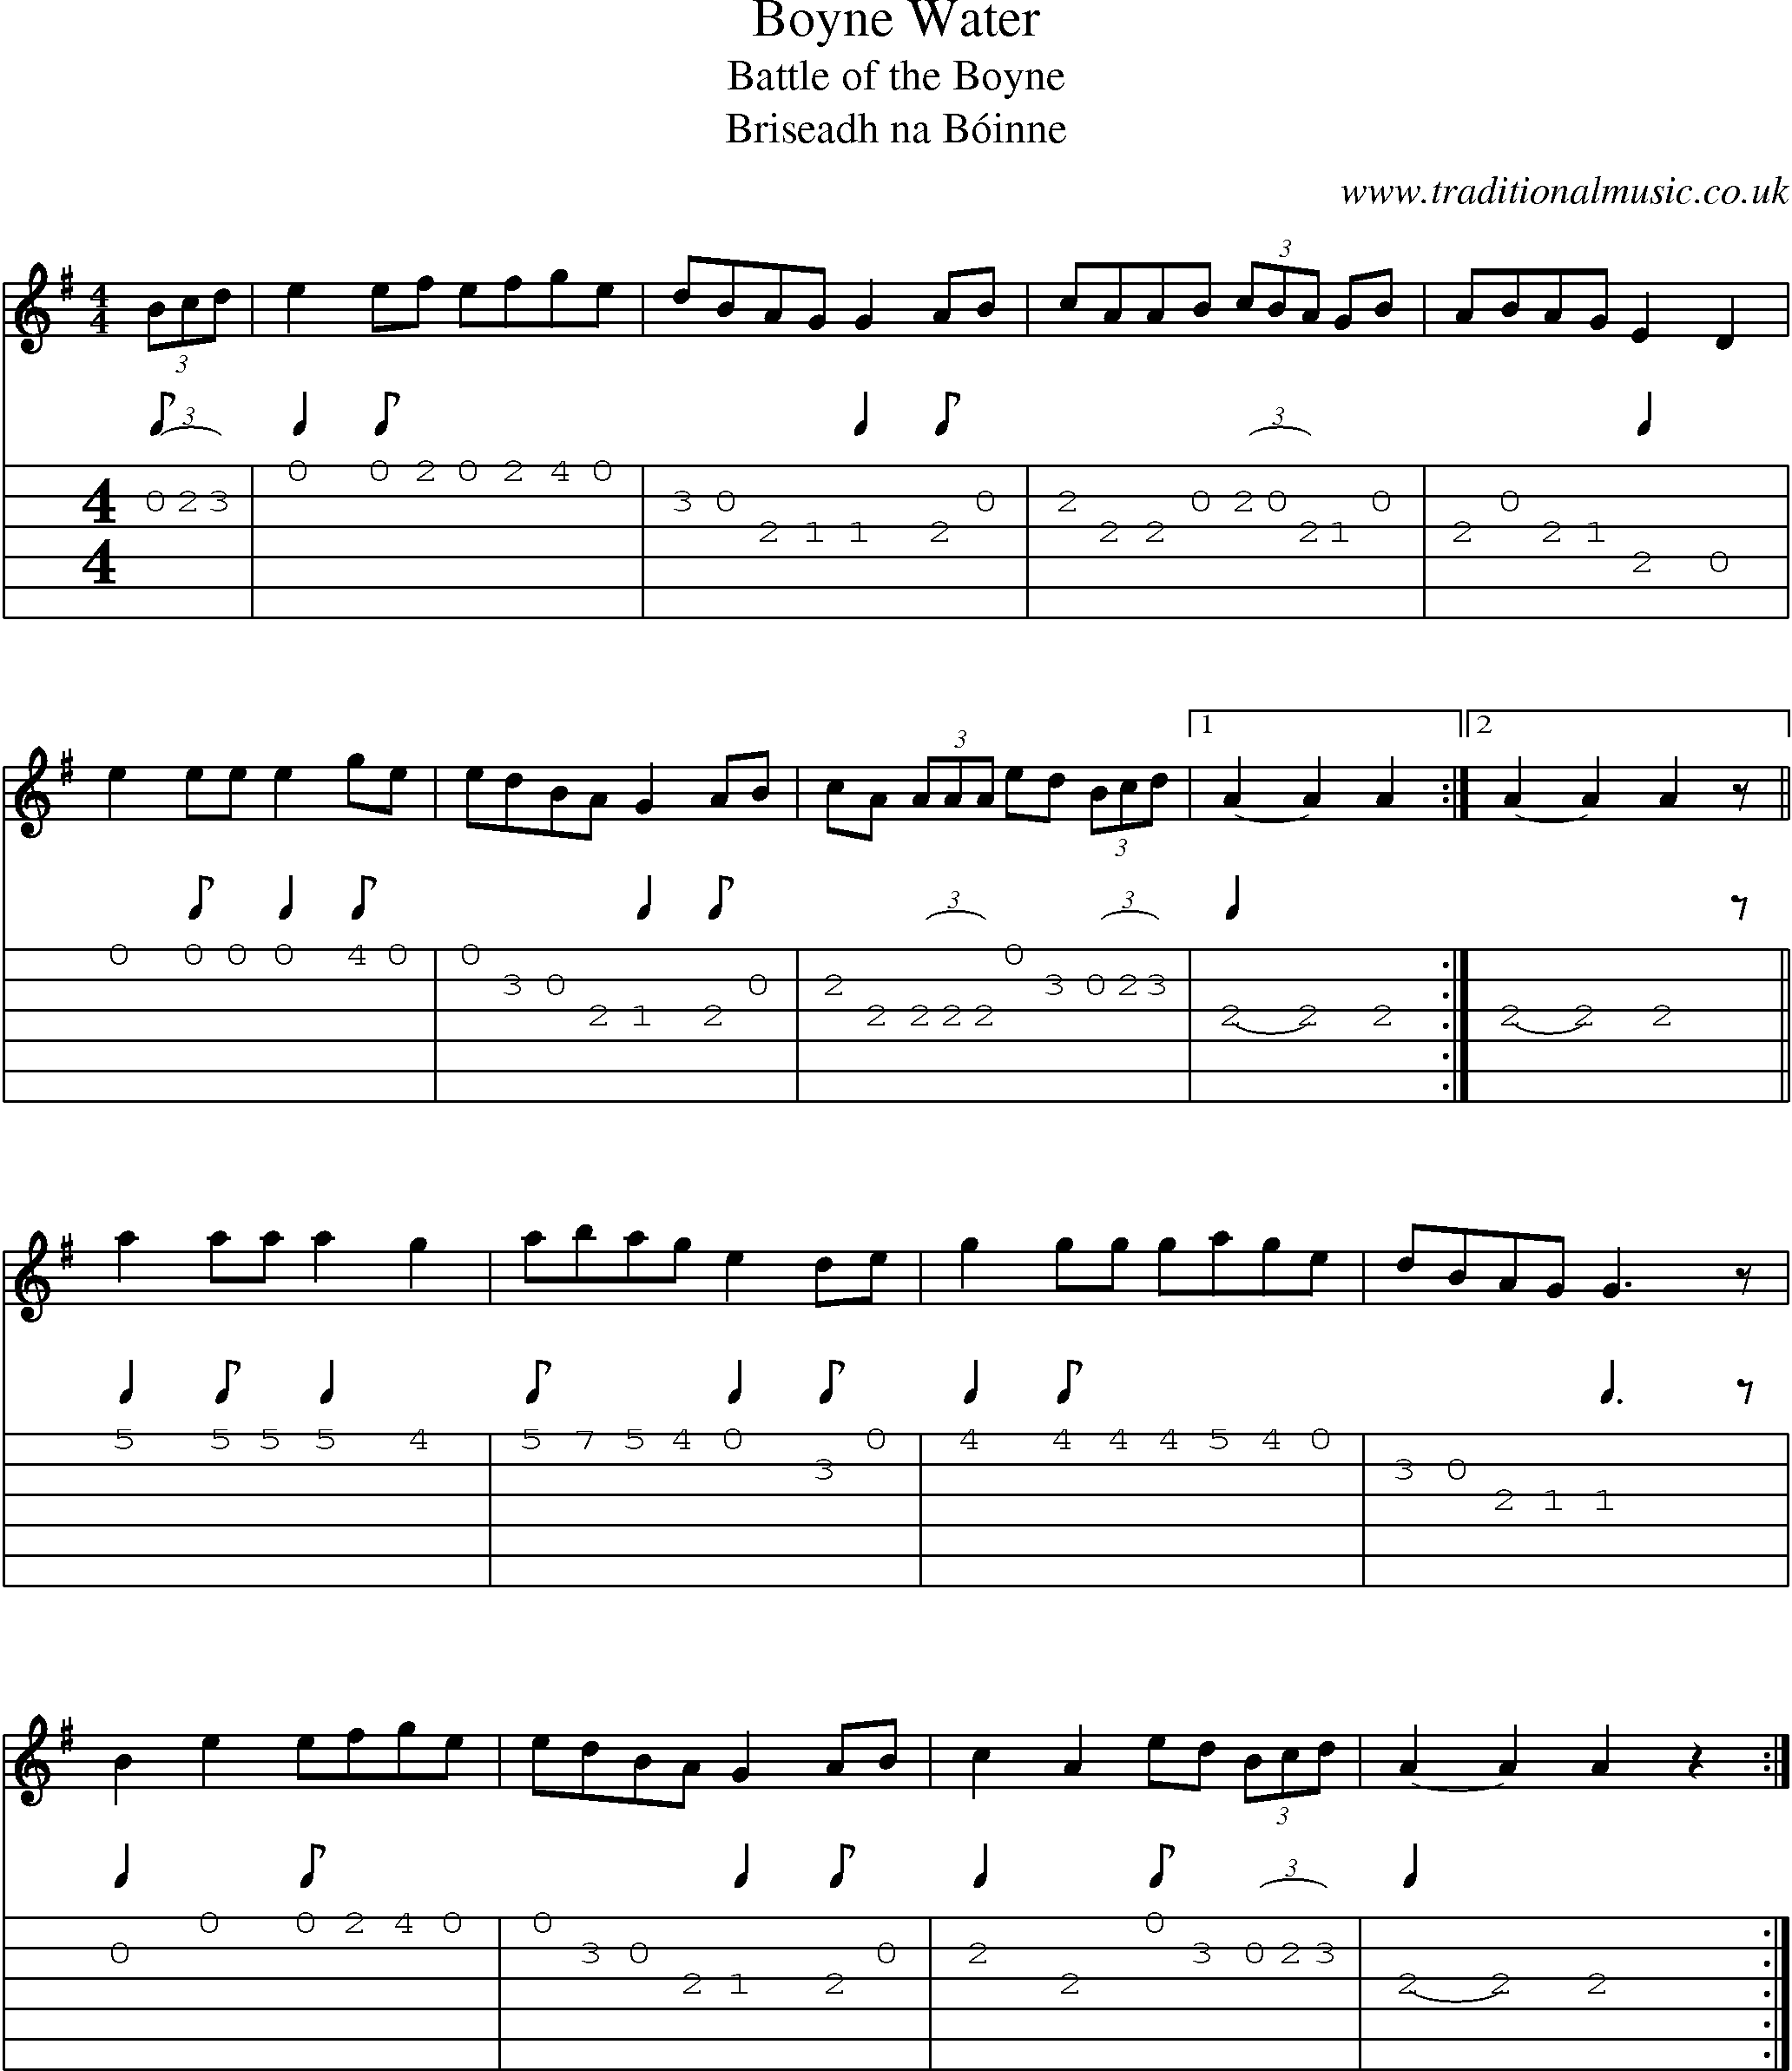 Music Score and Guitar Tabs for Boyne Water